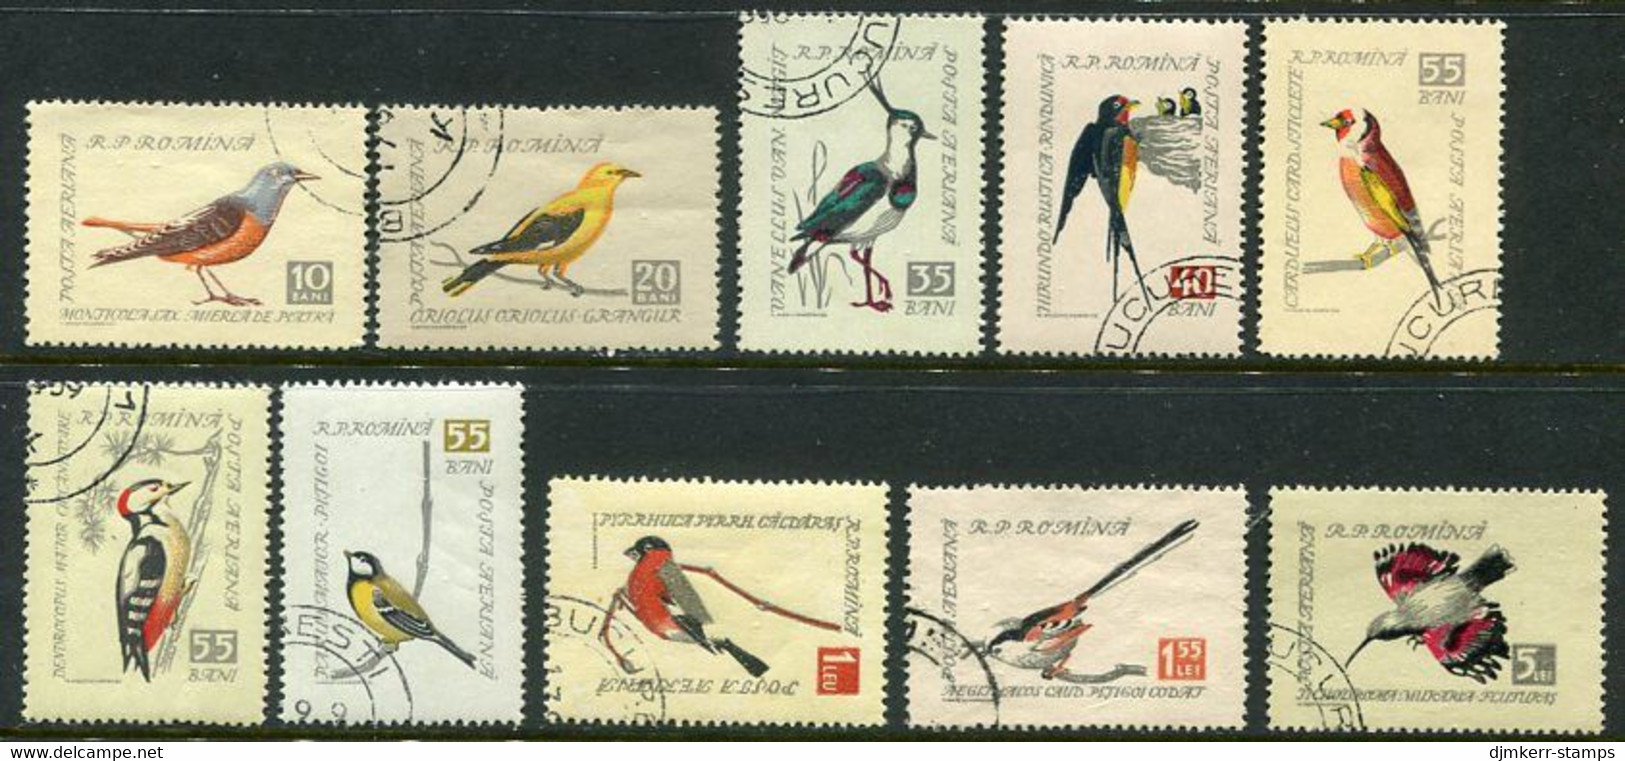 ROMANIA 1959 Song Birds  Used.  Michel 1780-89 - Used Stamps